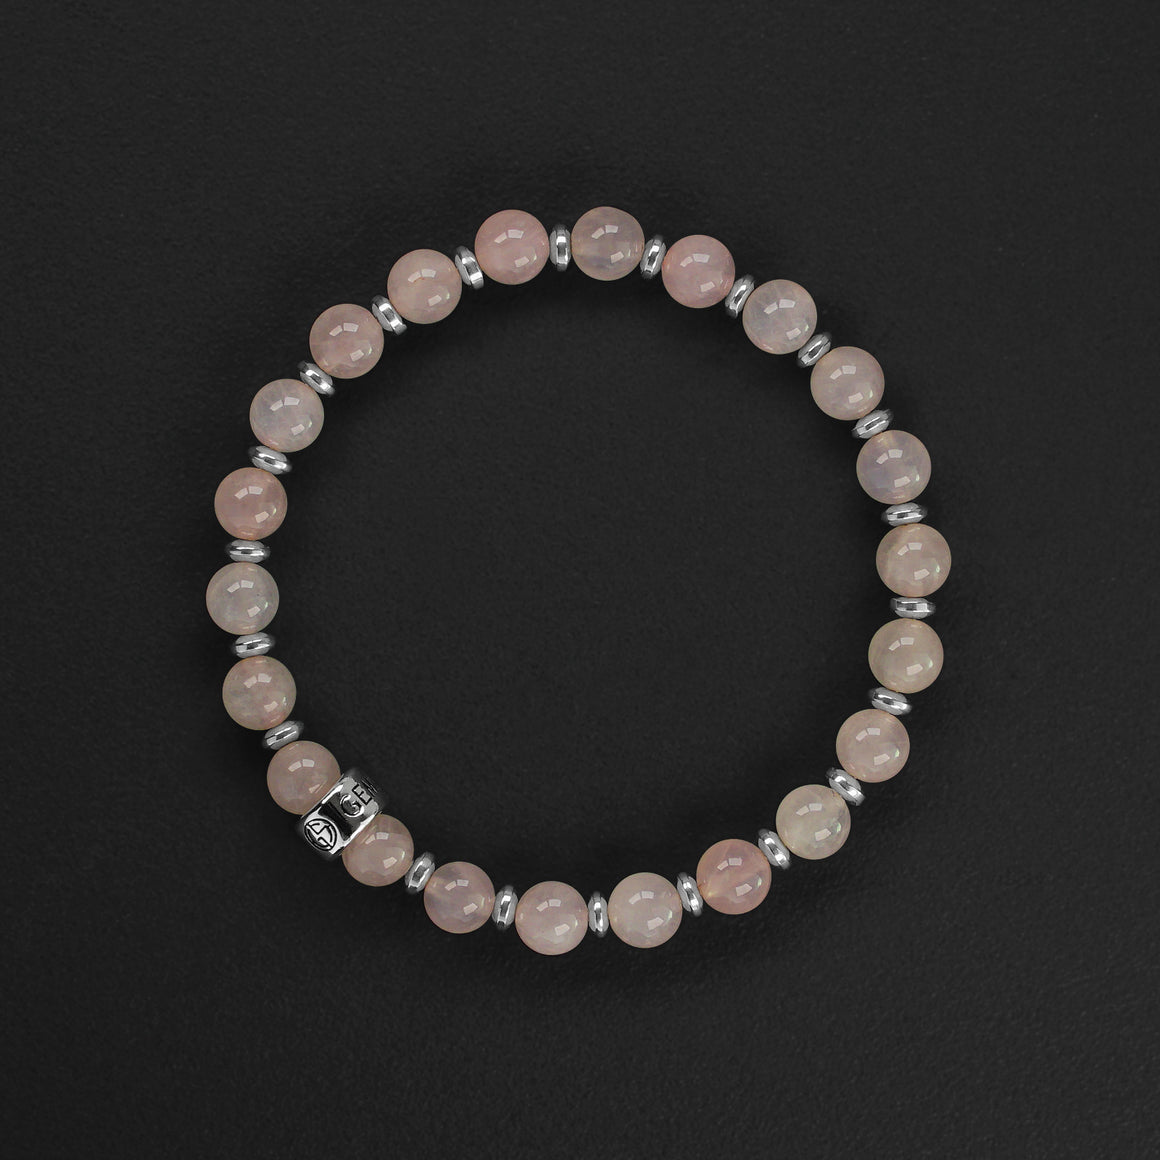 Rose Quartz natural gemstone bracelet with branded silver charm by Gems In Style Jewellery.